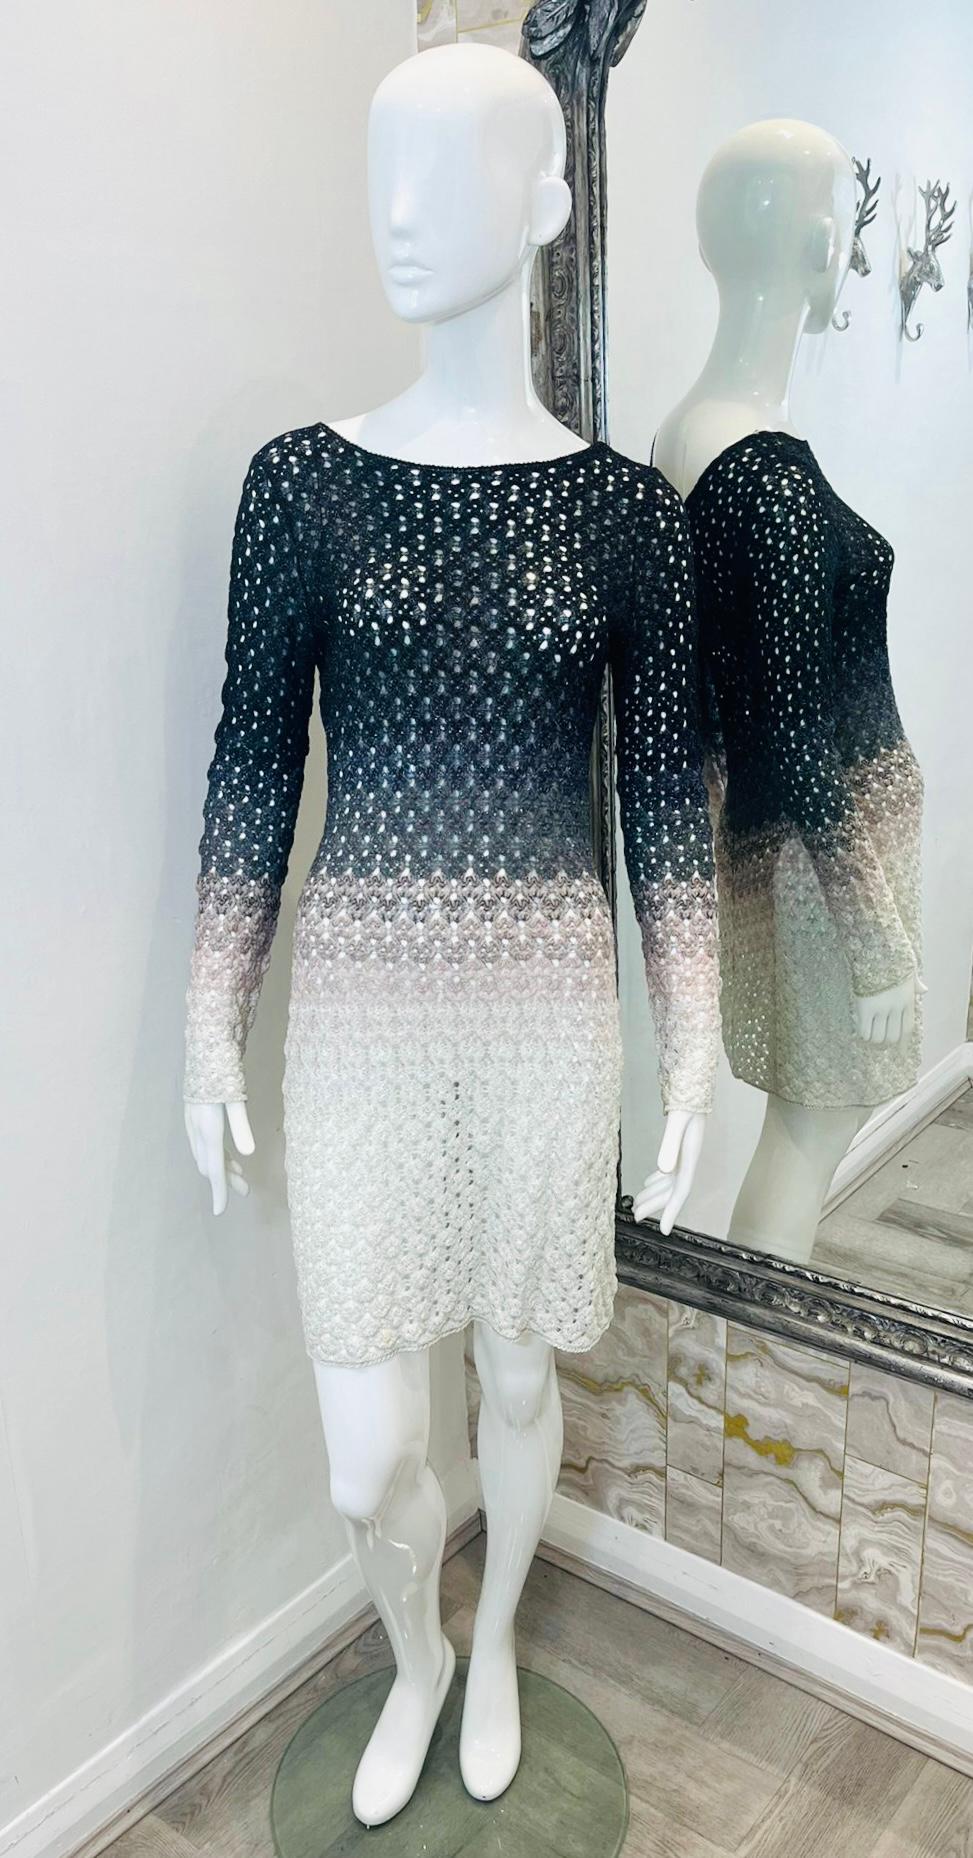 Missoni Crochet Knit Ombre Dress

Mini dress designed with ombre effect in the shades of black, grey, pale pink and white.

Detailed with round neckline to the front and V-Neck to rear.

Featuring fitted silhouette and long sleeves.

Size –